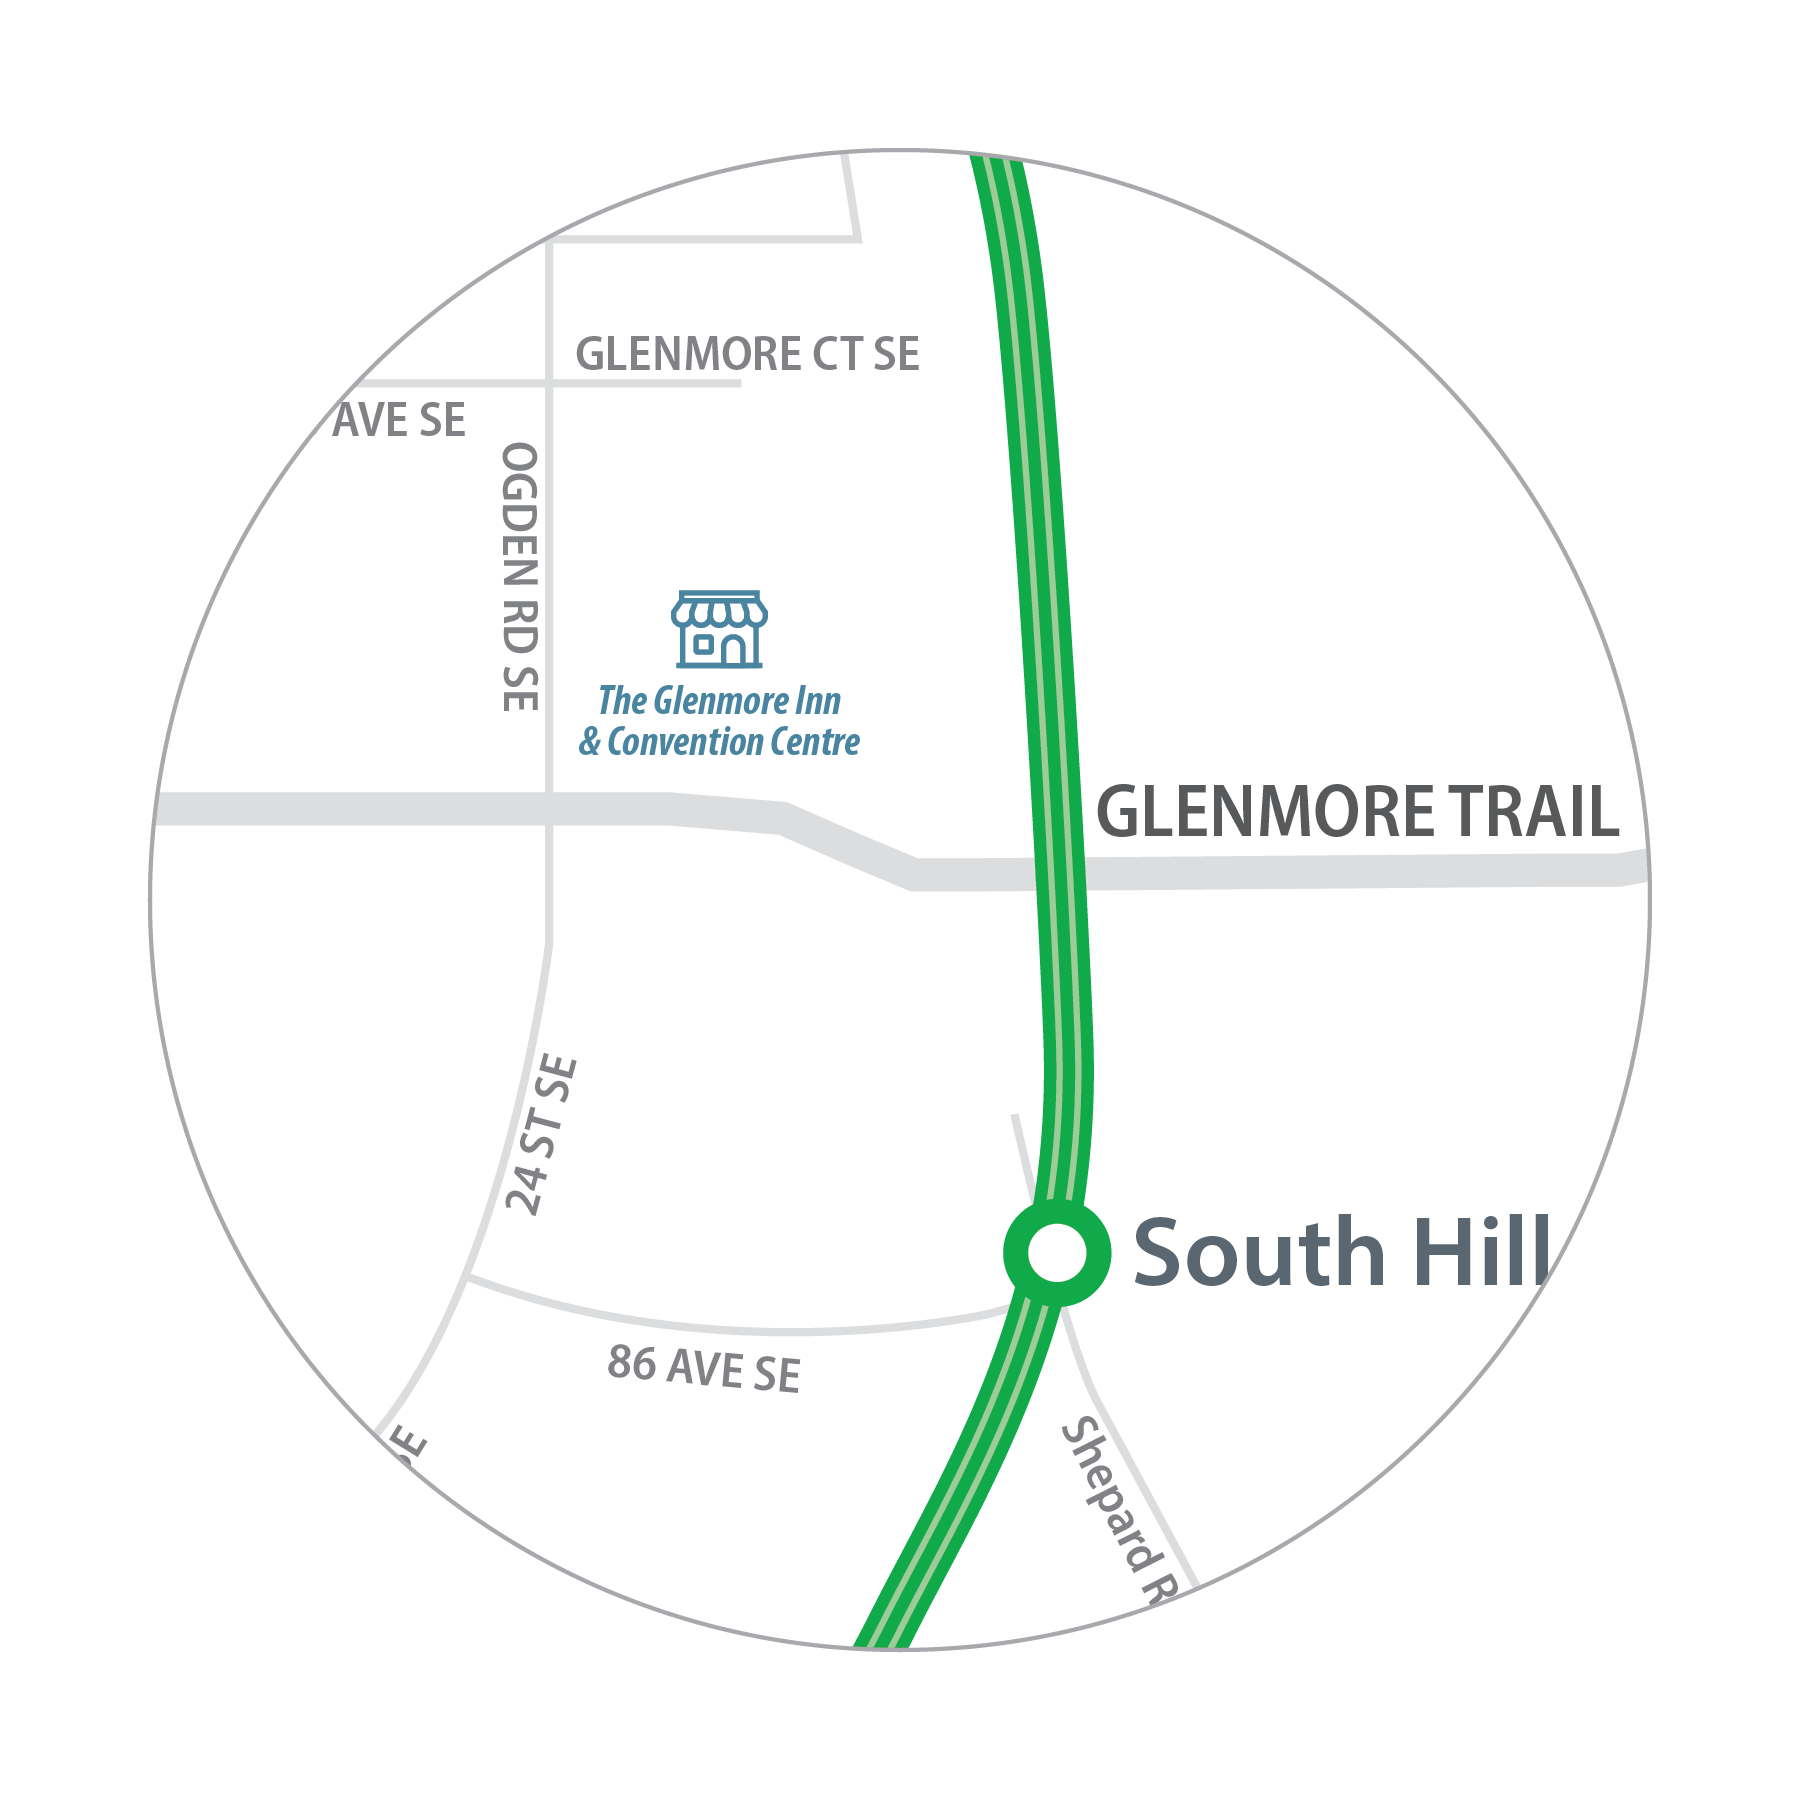 Map of Glenmore Inn location in relation to South Hill Station.